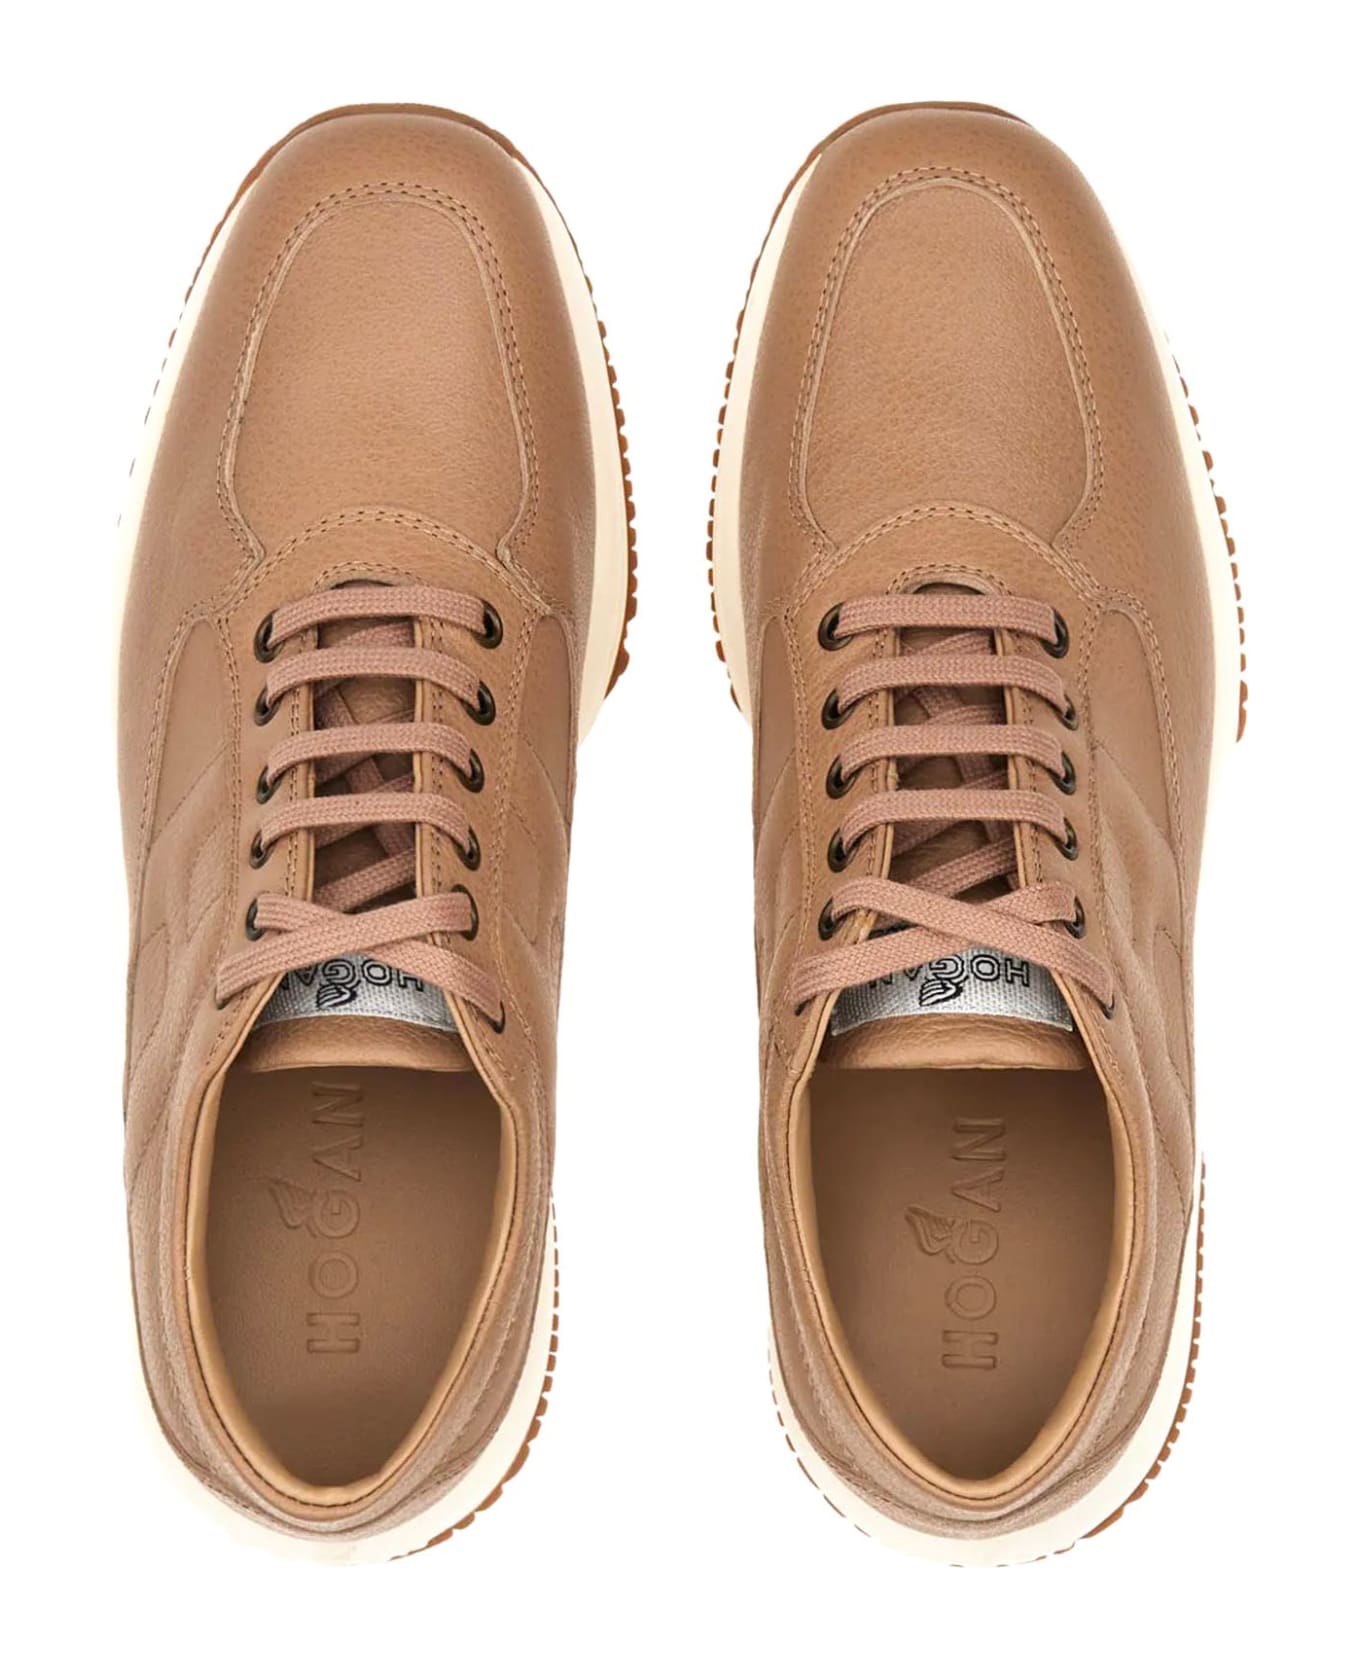 Hogan Interactive Leather Sneakers - CARNE MEDIO スニーカー